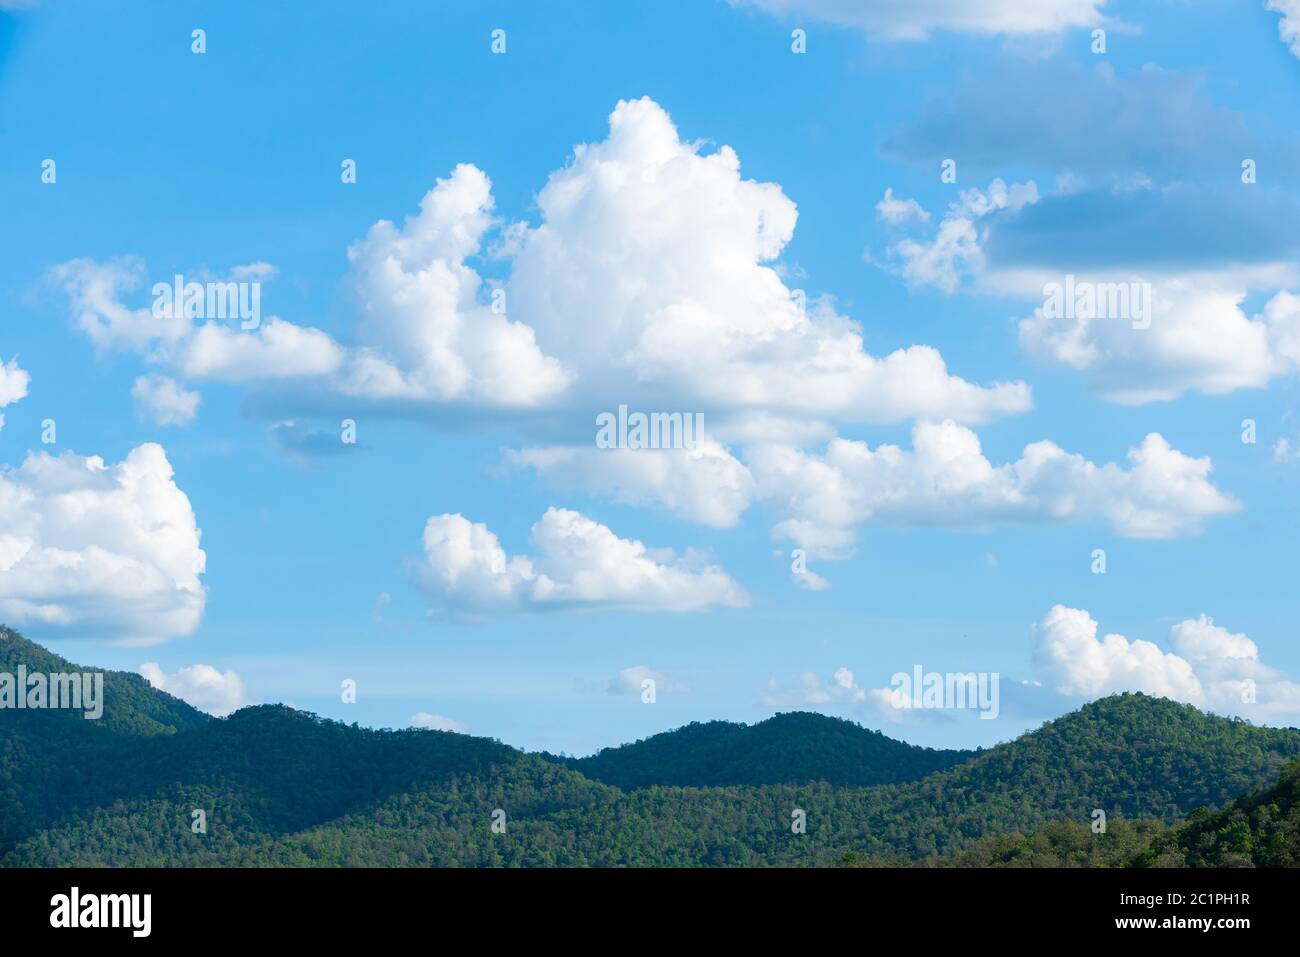 Green mountain landscape with blue sky cloudy background Stock Photo